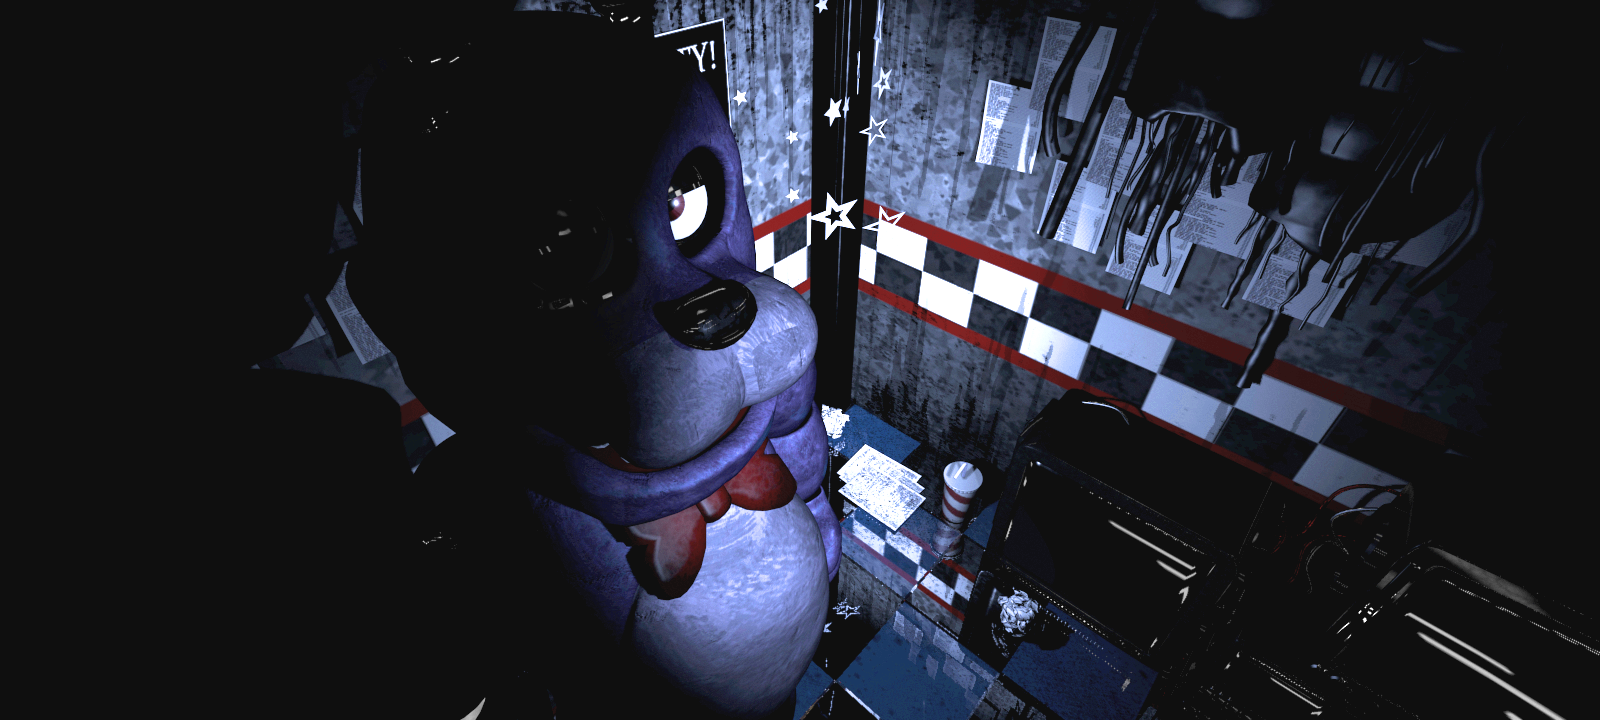 Five Nights at Freddy's 4 / Nightmare Fuel - TV Tropes